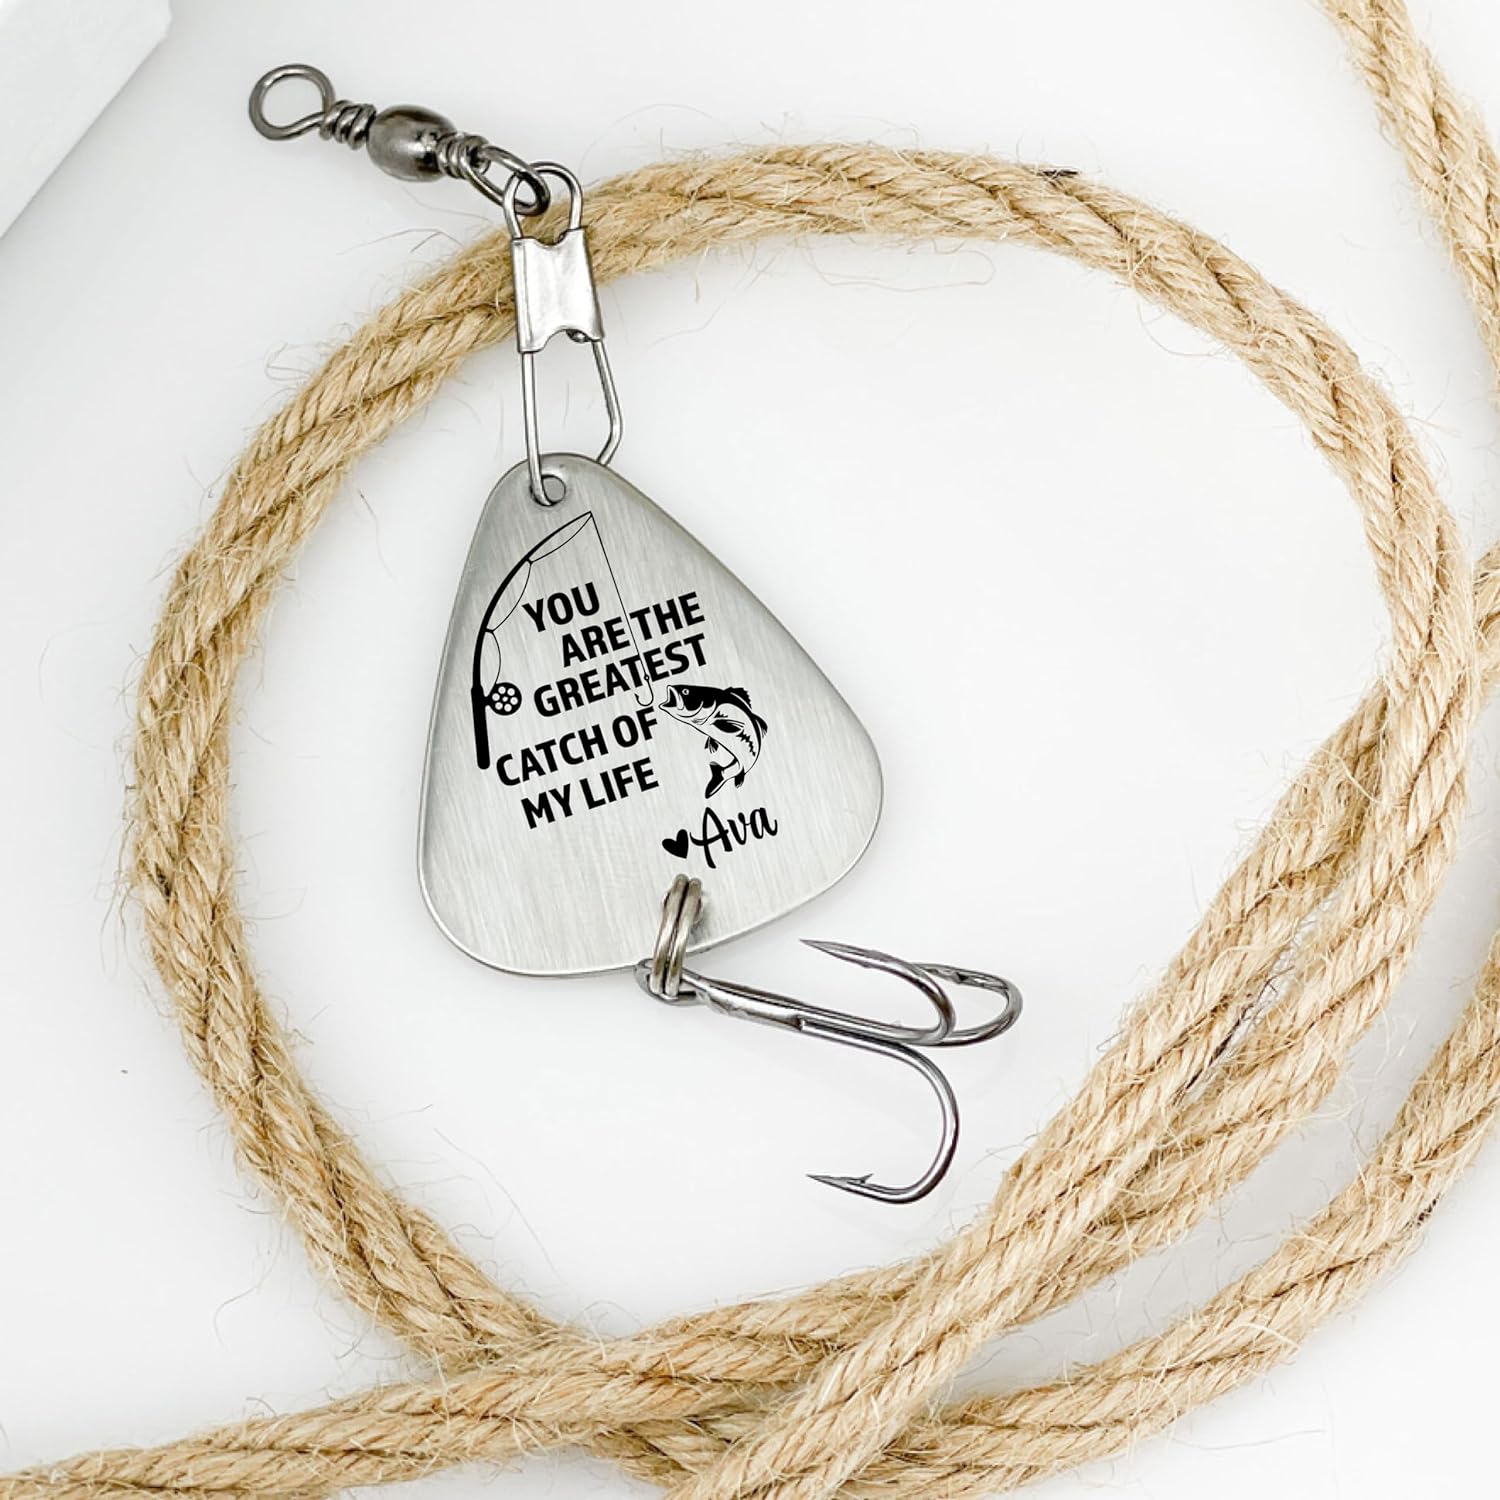 Personalized Fishing Lure You Are The Greatest Catch Of My Life Fishing Lure Gift Men's Gift for Husband Gift Boyfriend Personalized Name GREATEST-LURE